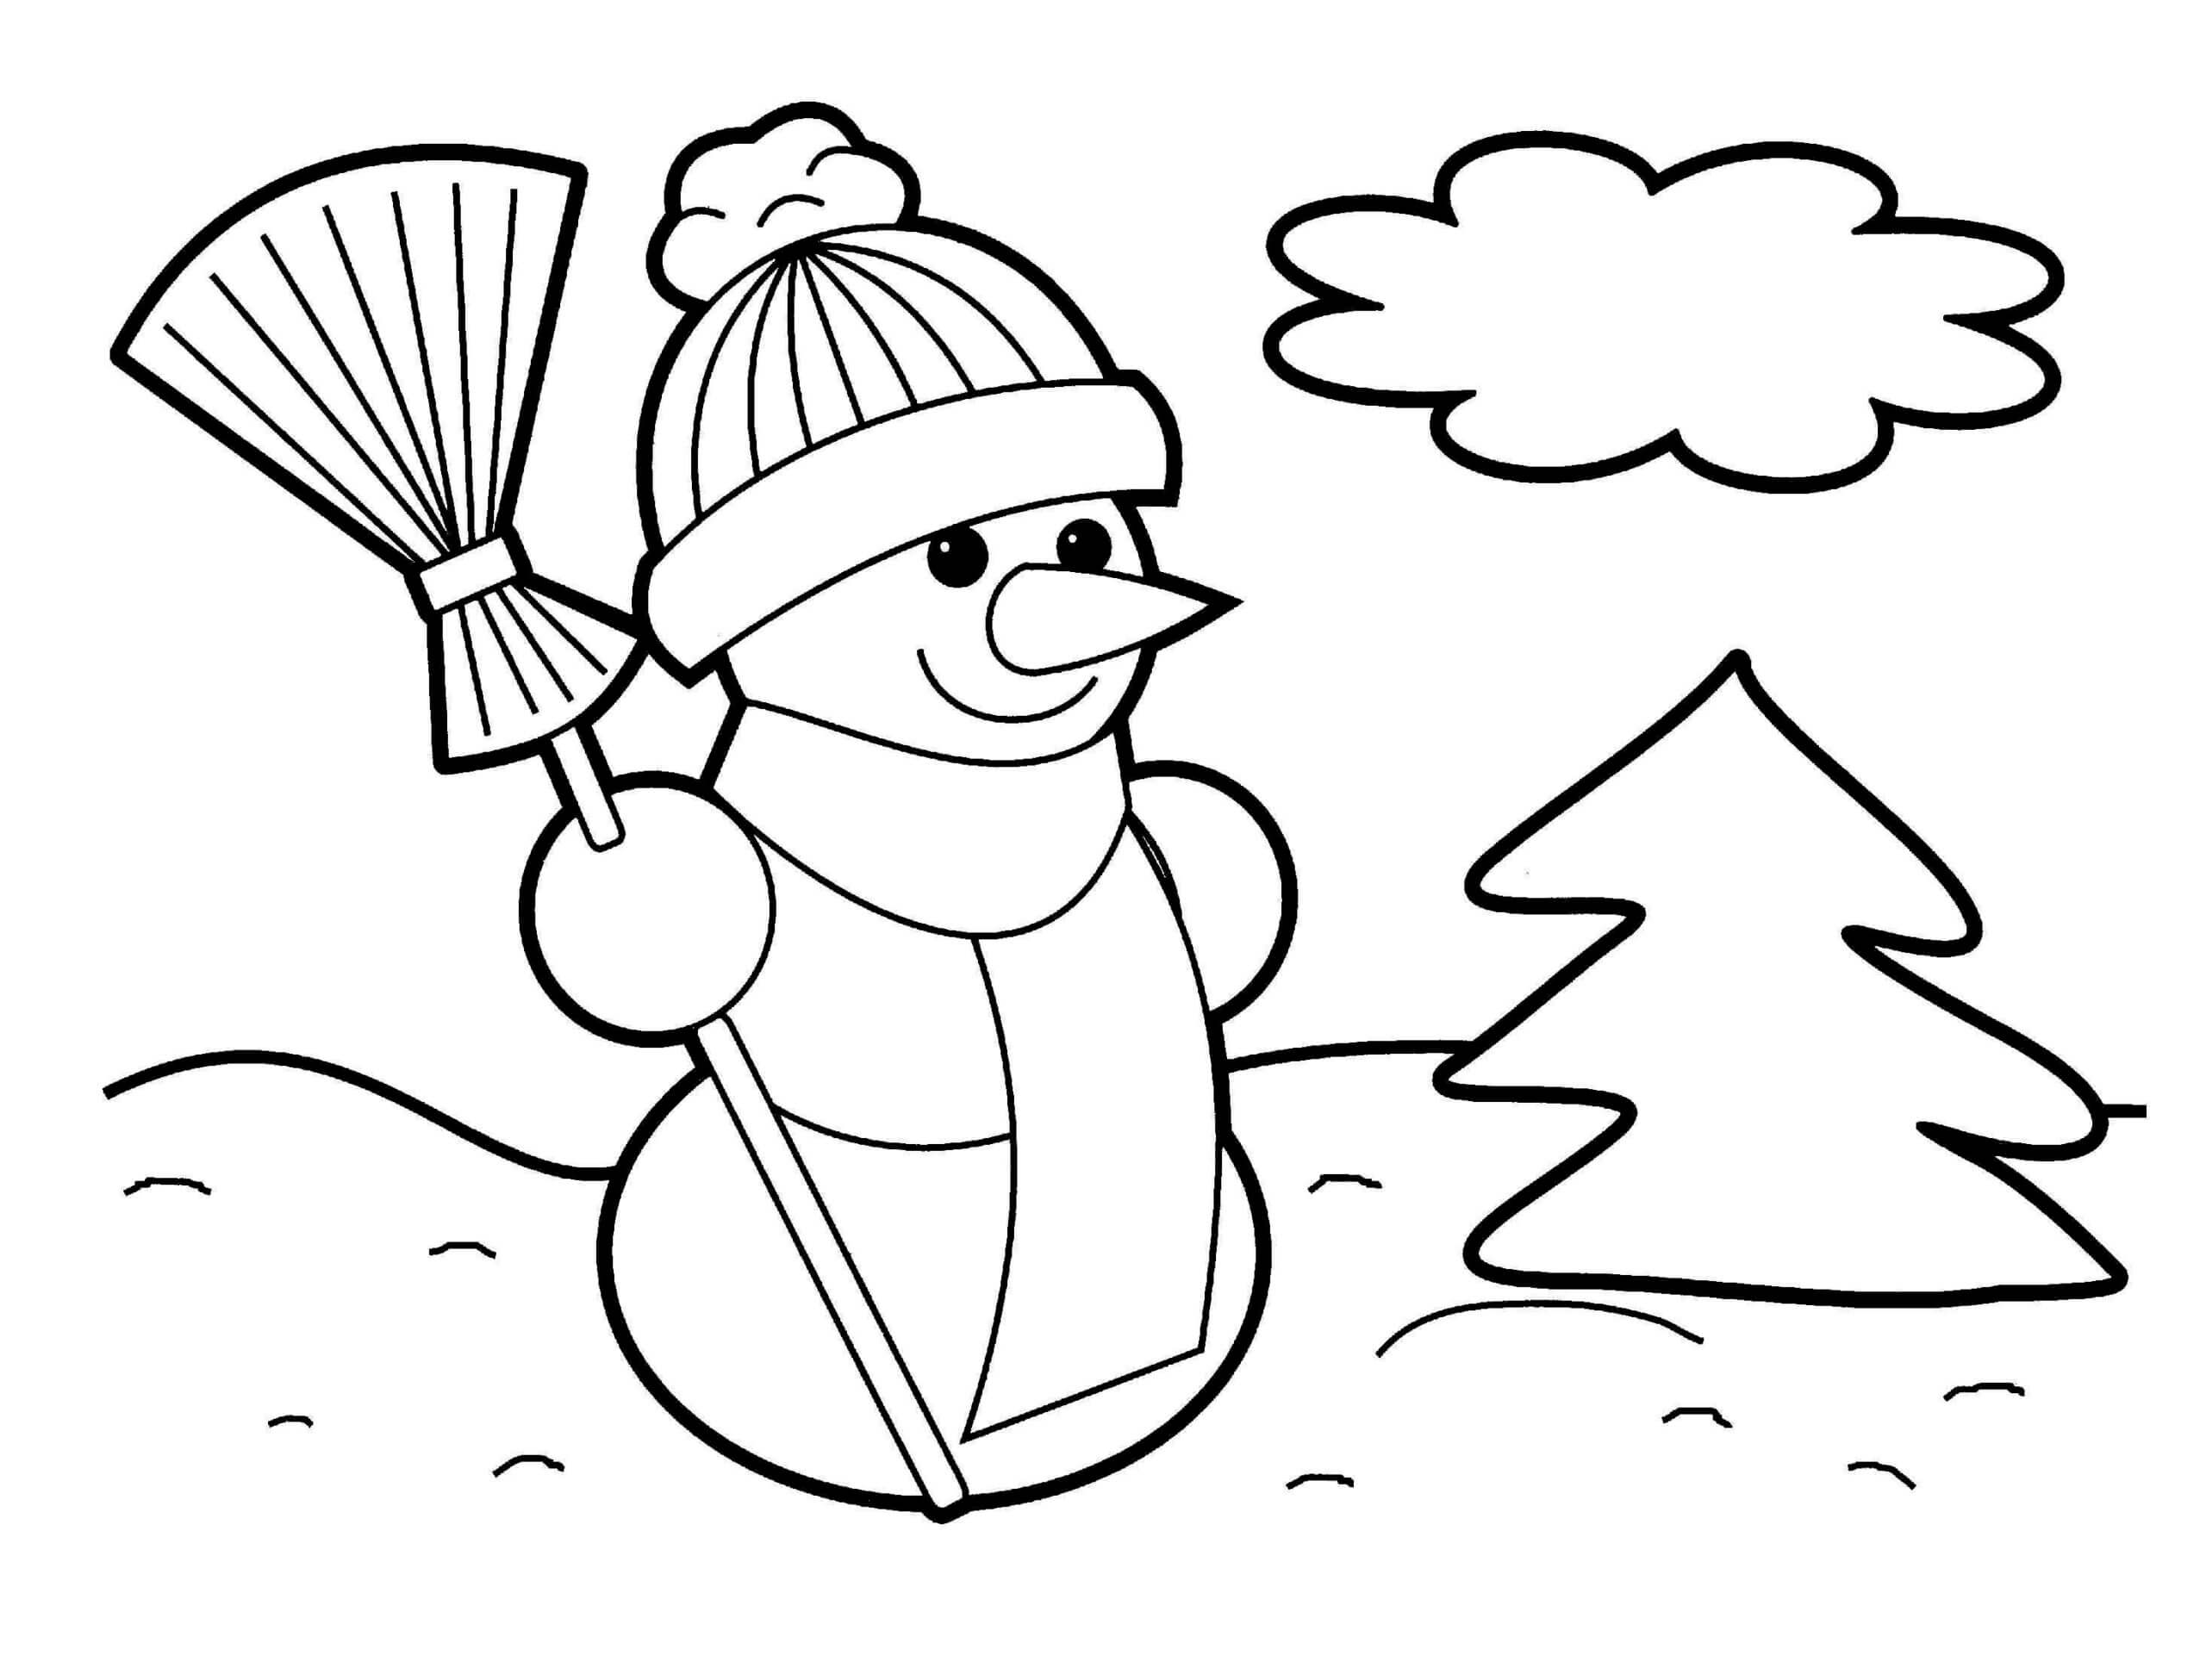 Easy Snowman Christmas Coloring Page For Preschoolers Scaled